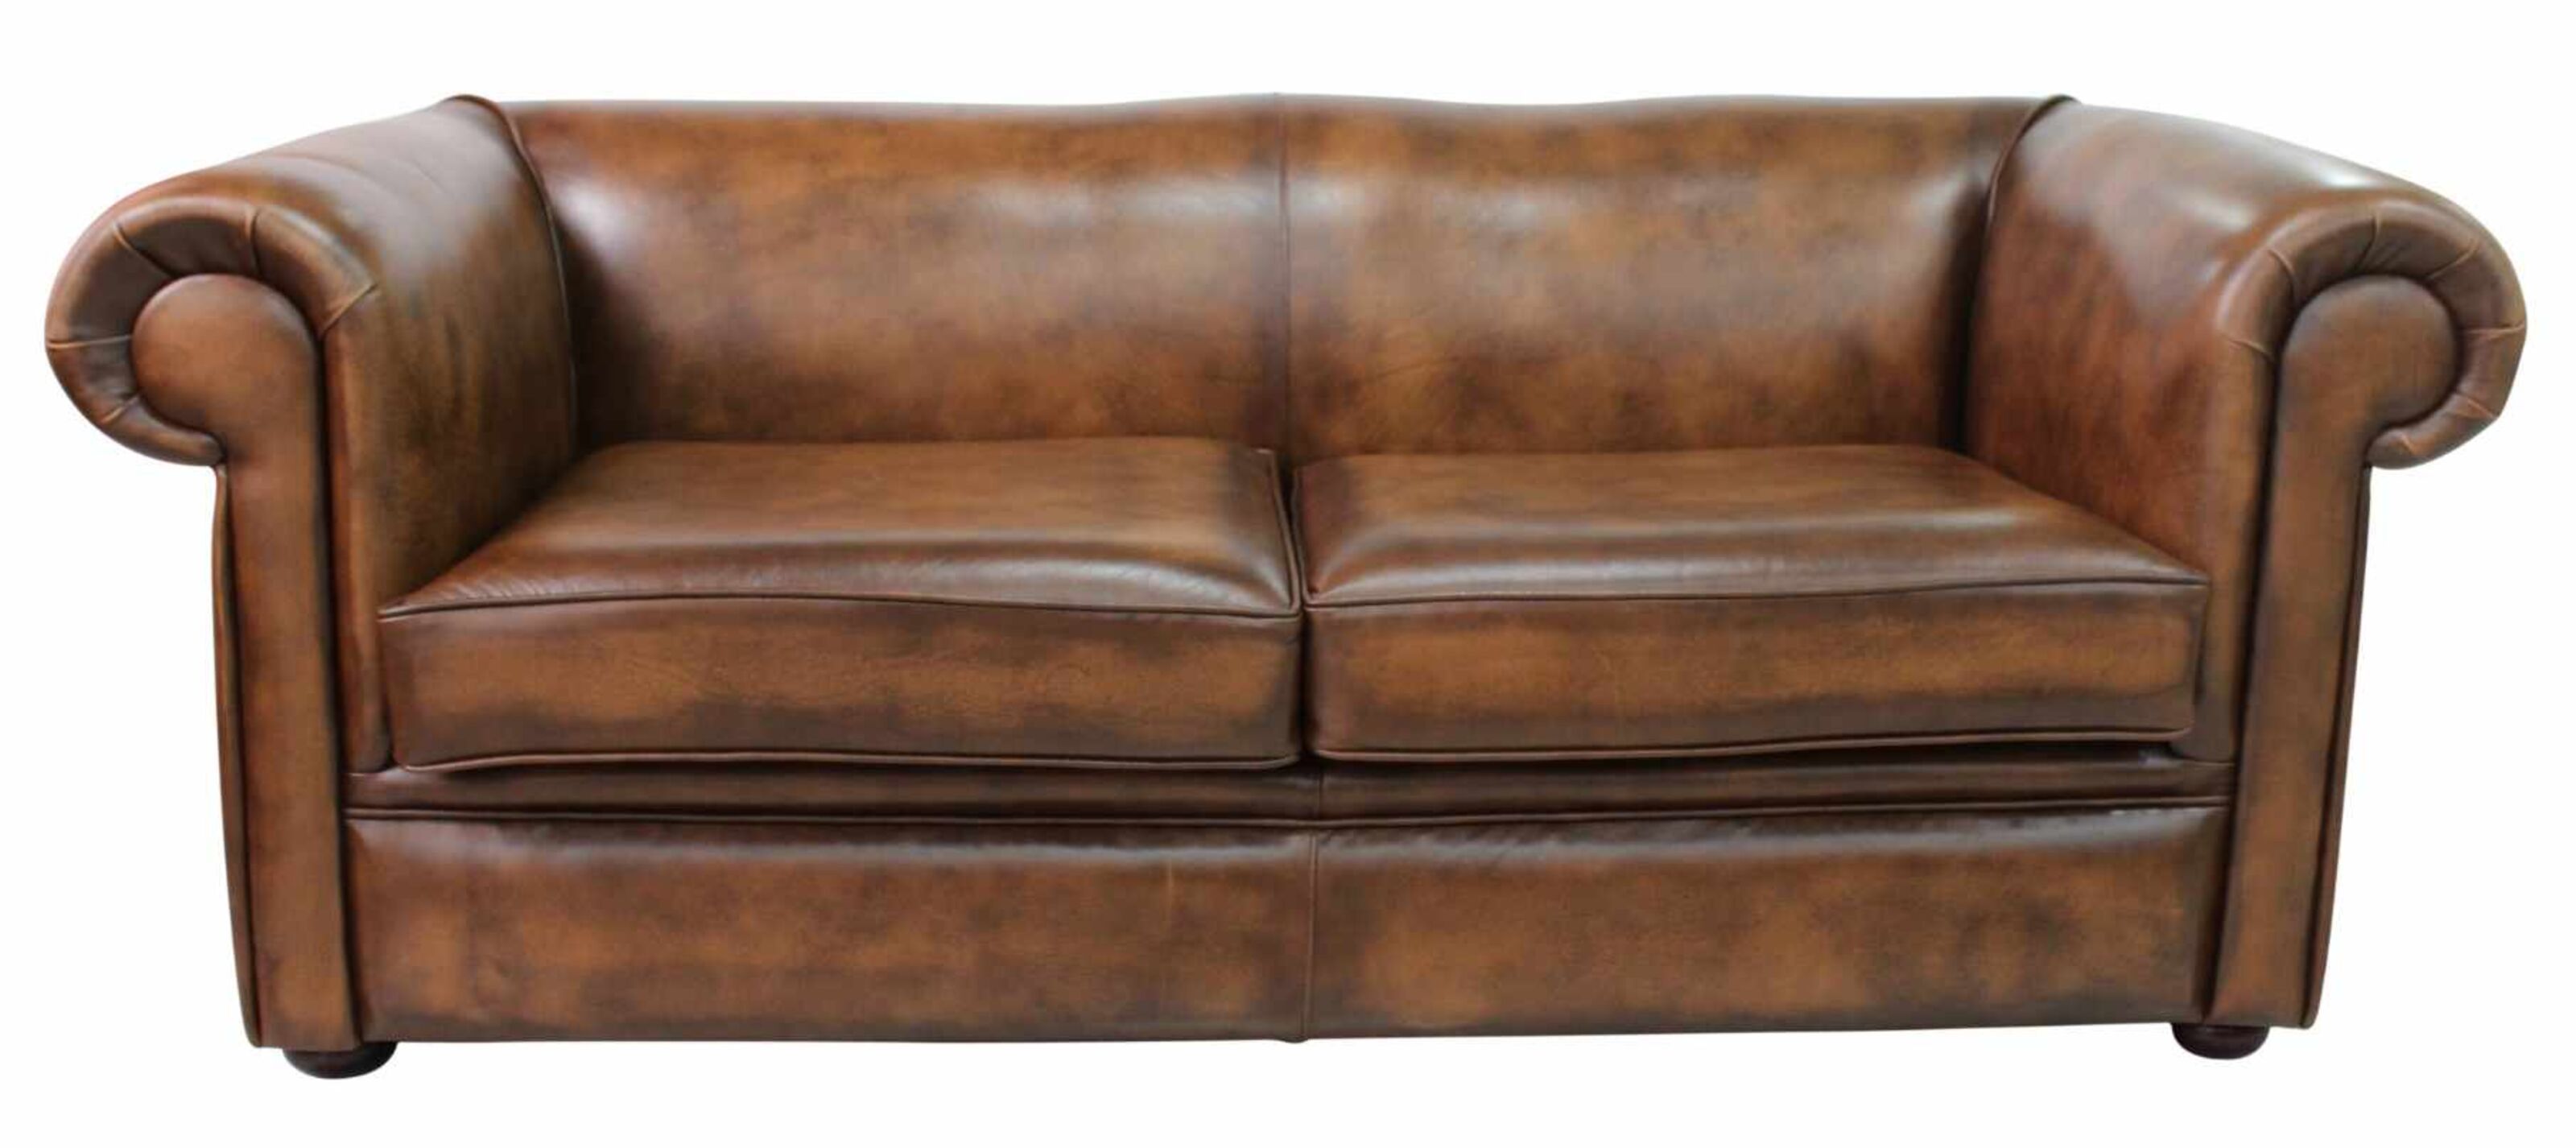 Crafting Timeless Elegance The Origin and Excellence of Chesterfield Sofas  %Post Title